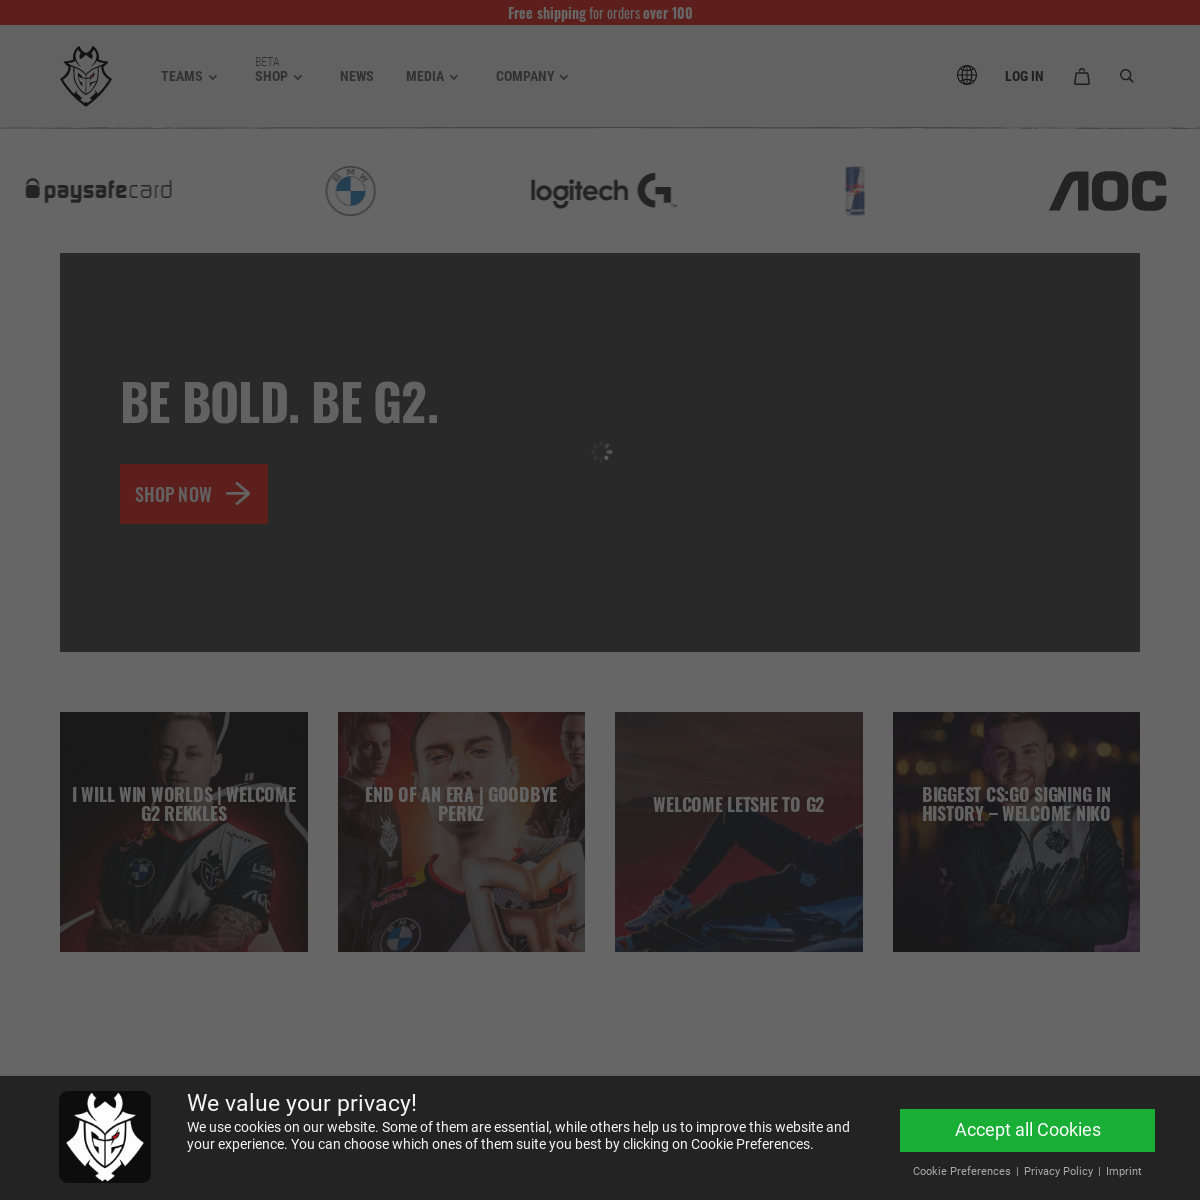 A complete backup of g2esports.com